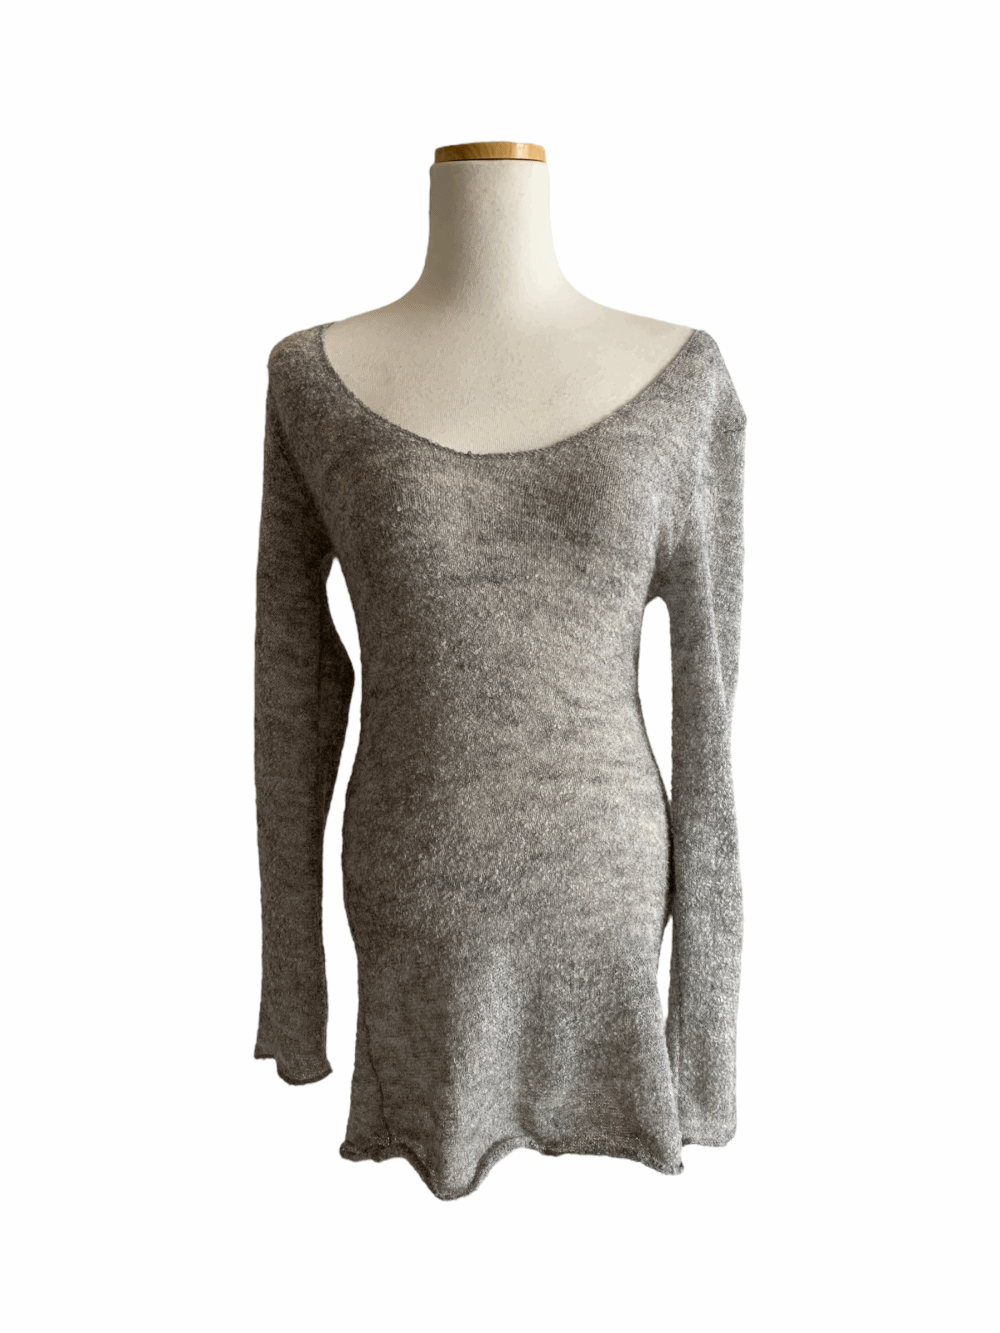 [Top] Kate Mohair Knit / 2 colors